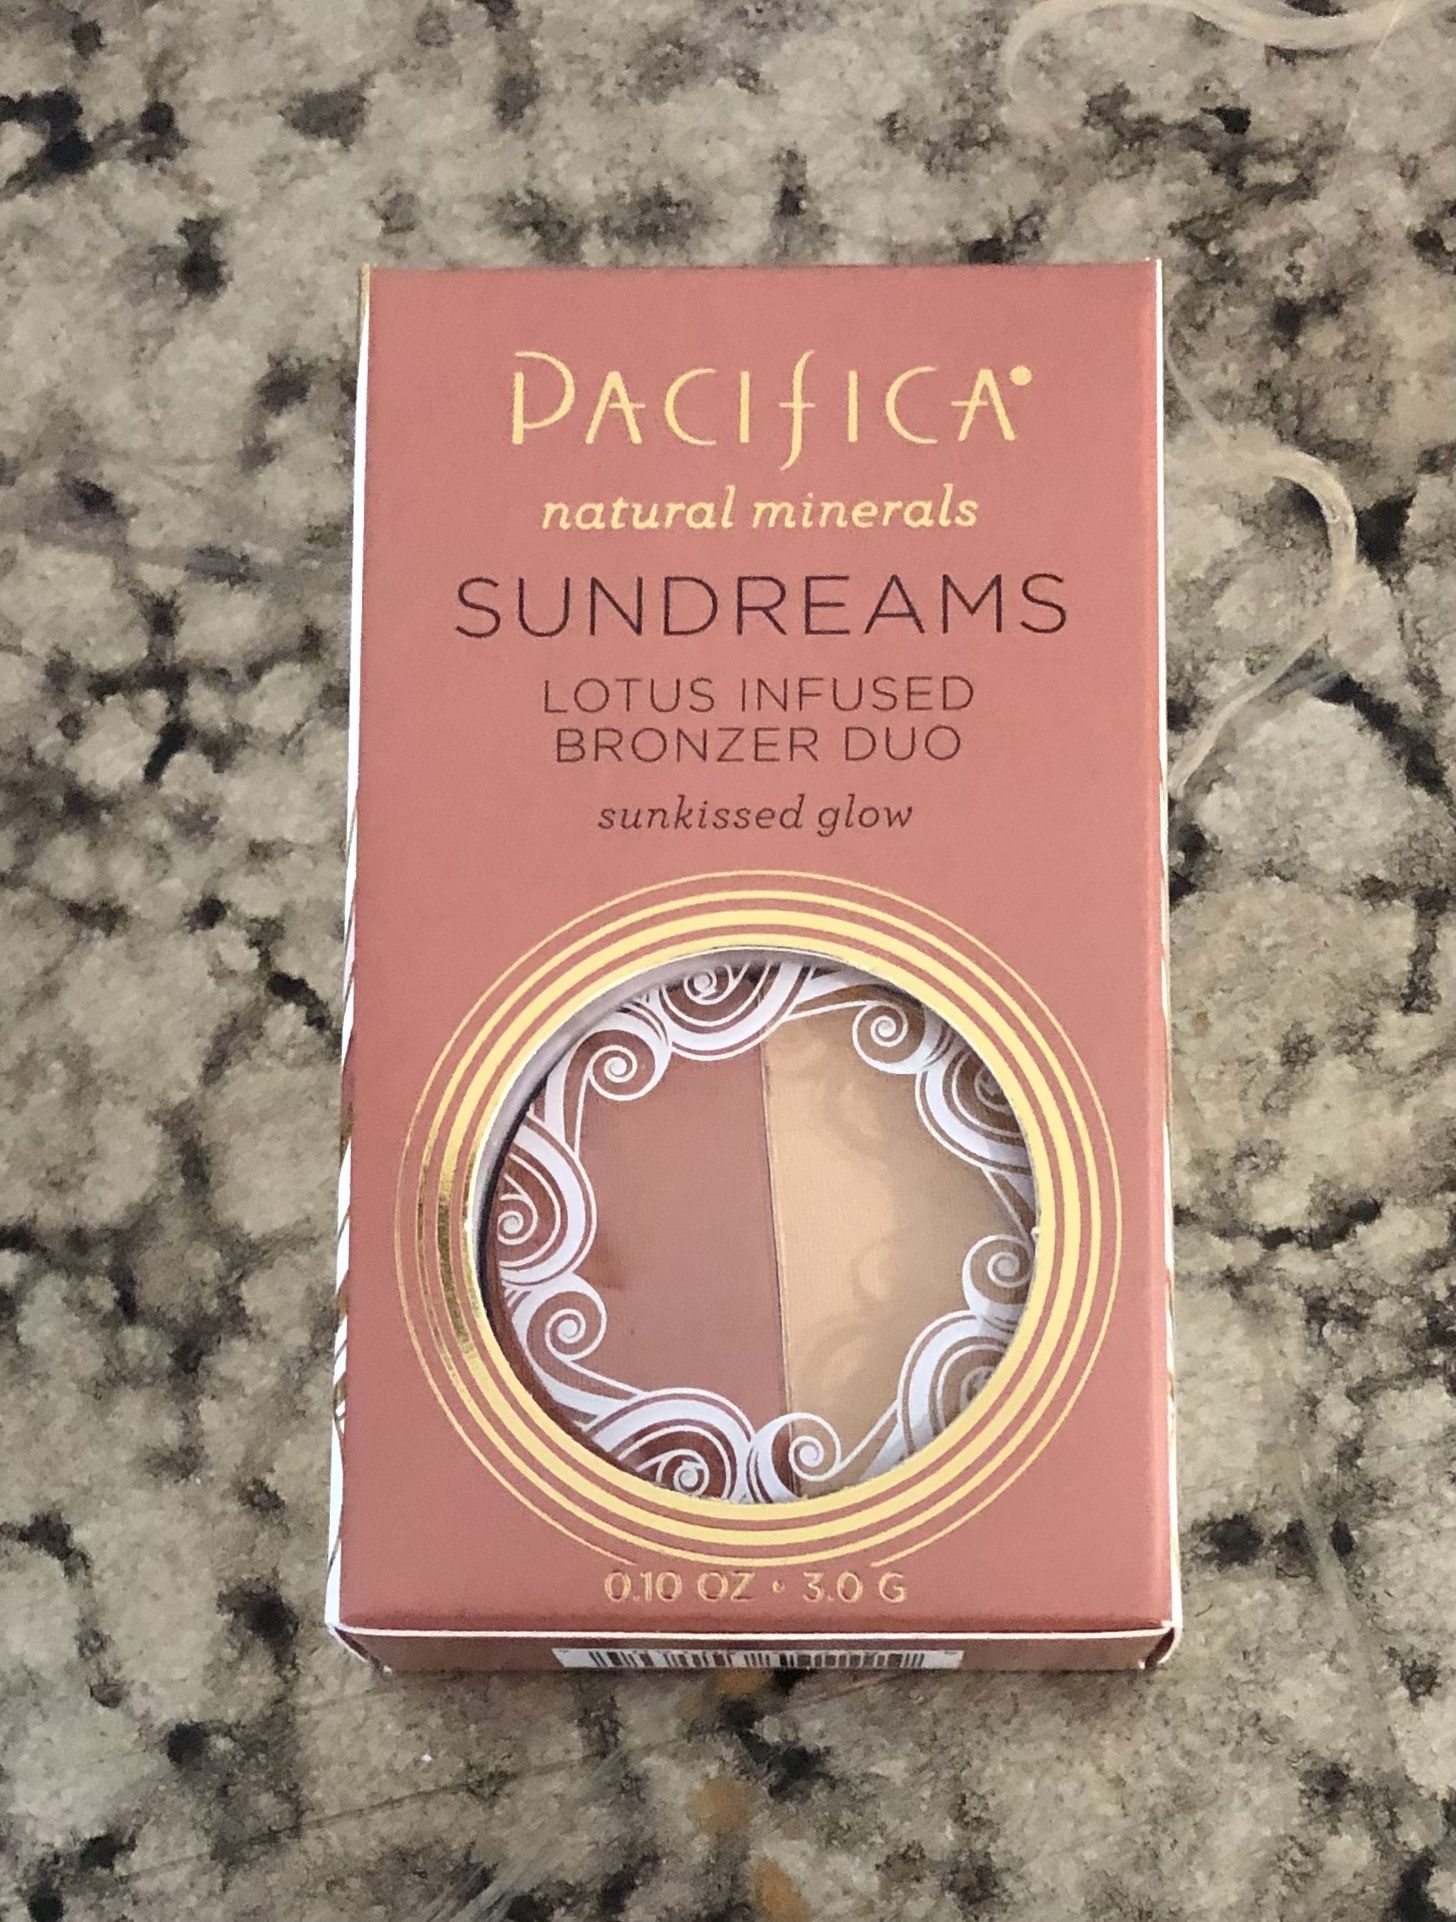 Pacifica Sundreams Lotus Infused Bronzer Duo - Sun kissed Glow - New in Box